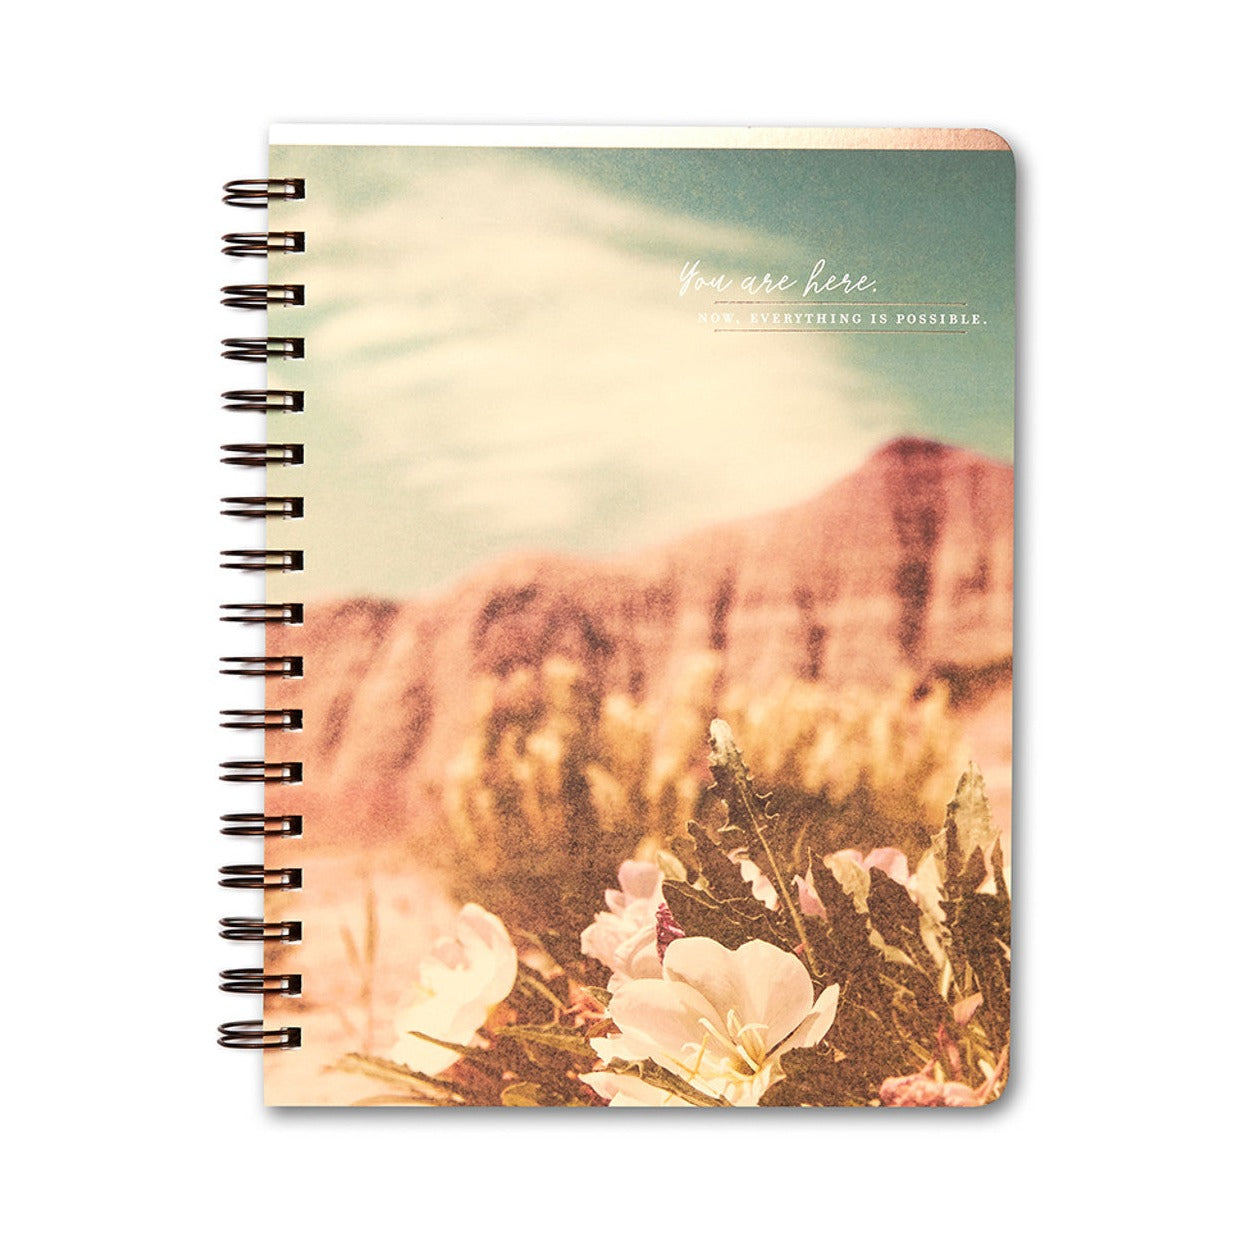 Today is your day—to discover, to believe, to follow your dreams. With thoughtful cover statements and reflections throughout, this spiral notebook is your space to record what matters most.   Includes three designed spreads that create four divided sections Features foil stamping on the cover